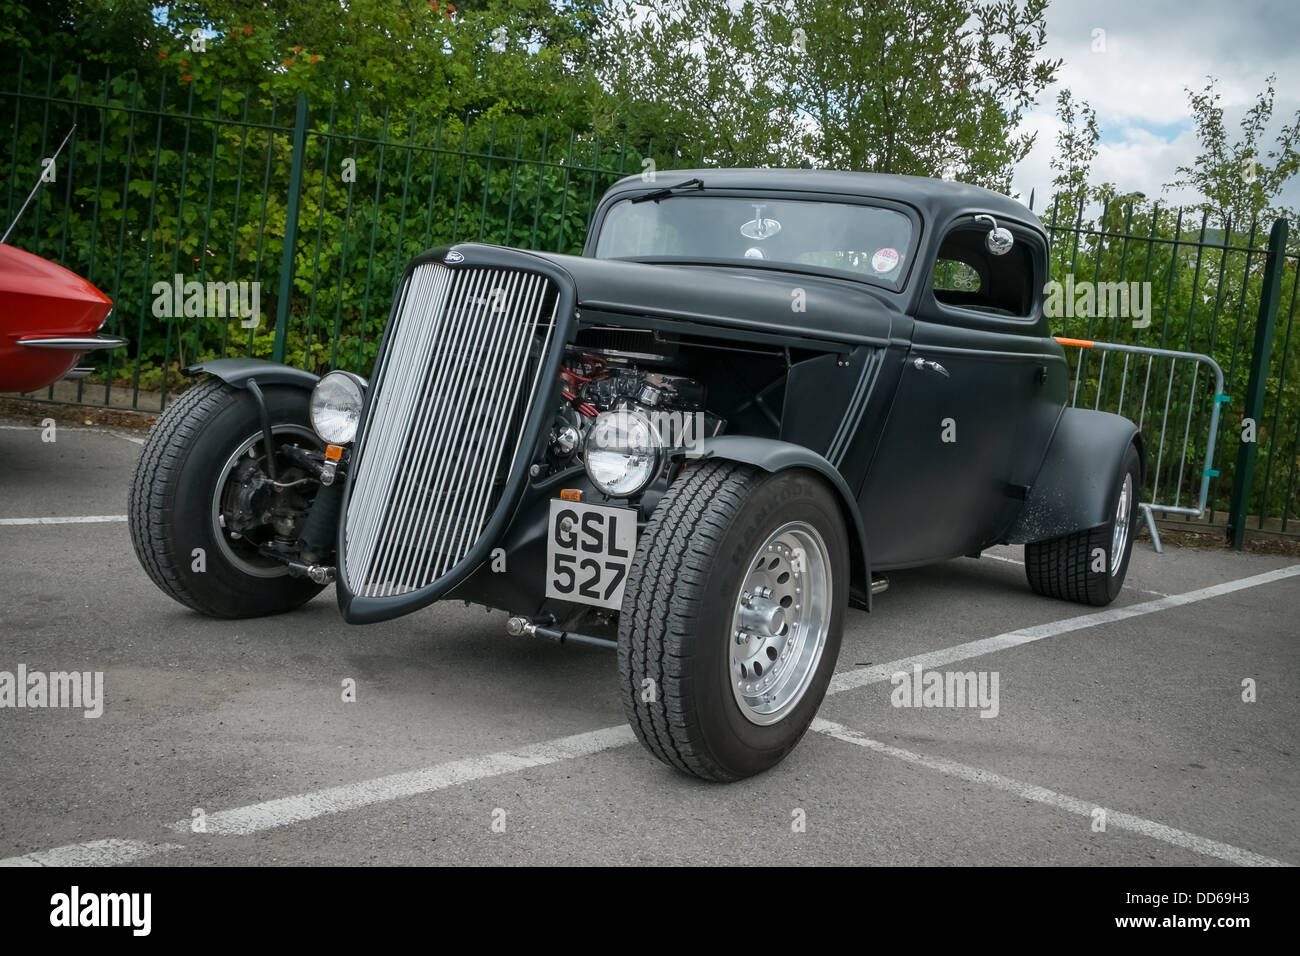 WEYBRIDGE, SURRY, UK - AUGUST 18:  Black Ford Hot Rod Coupe on show at the annual Brooklands Motor Museums Mustang and Anything Stock Photo